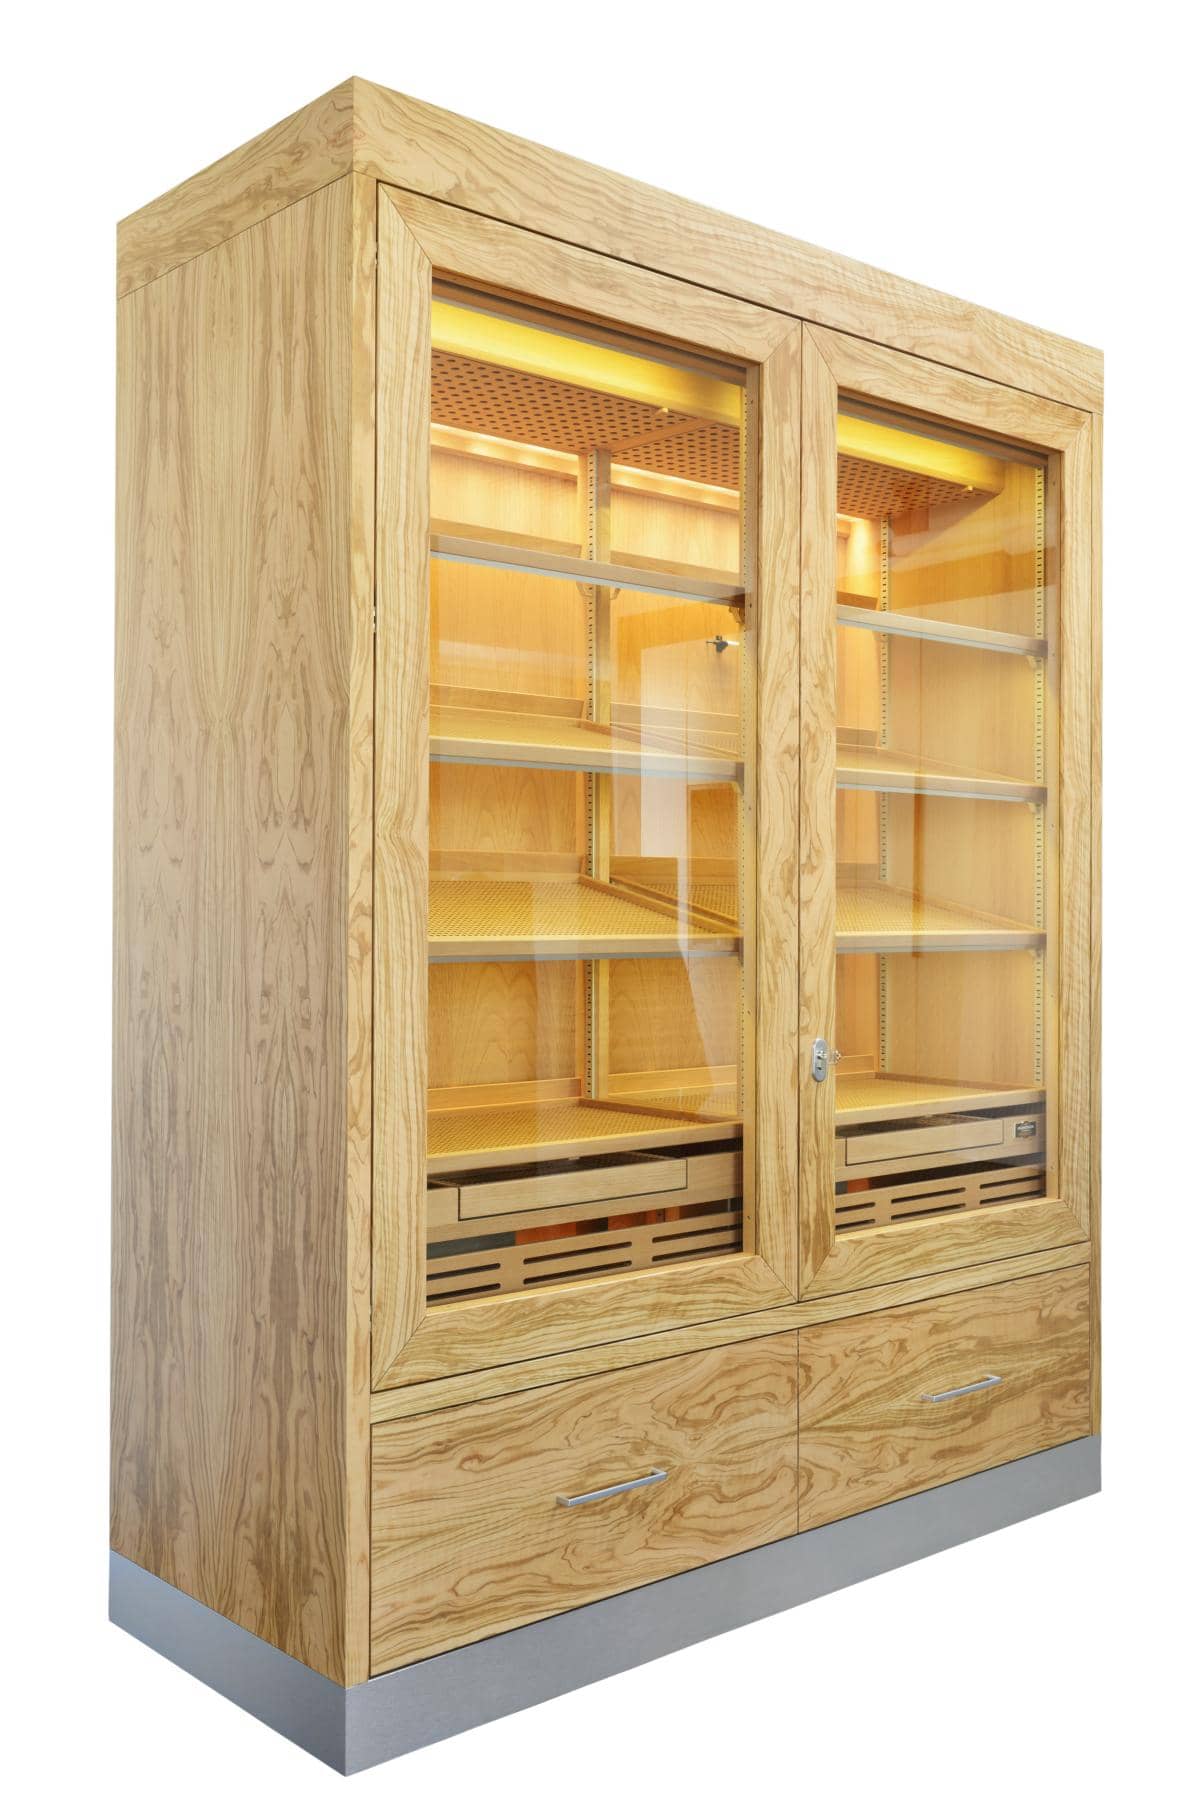 cigar-cabinet-gerber-olive-double-wing-solution